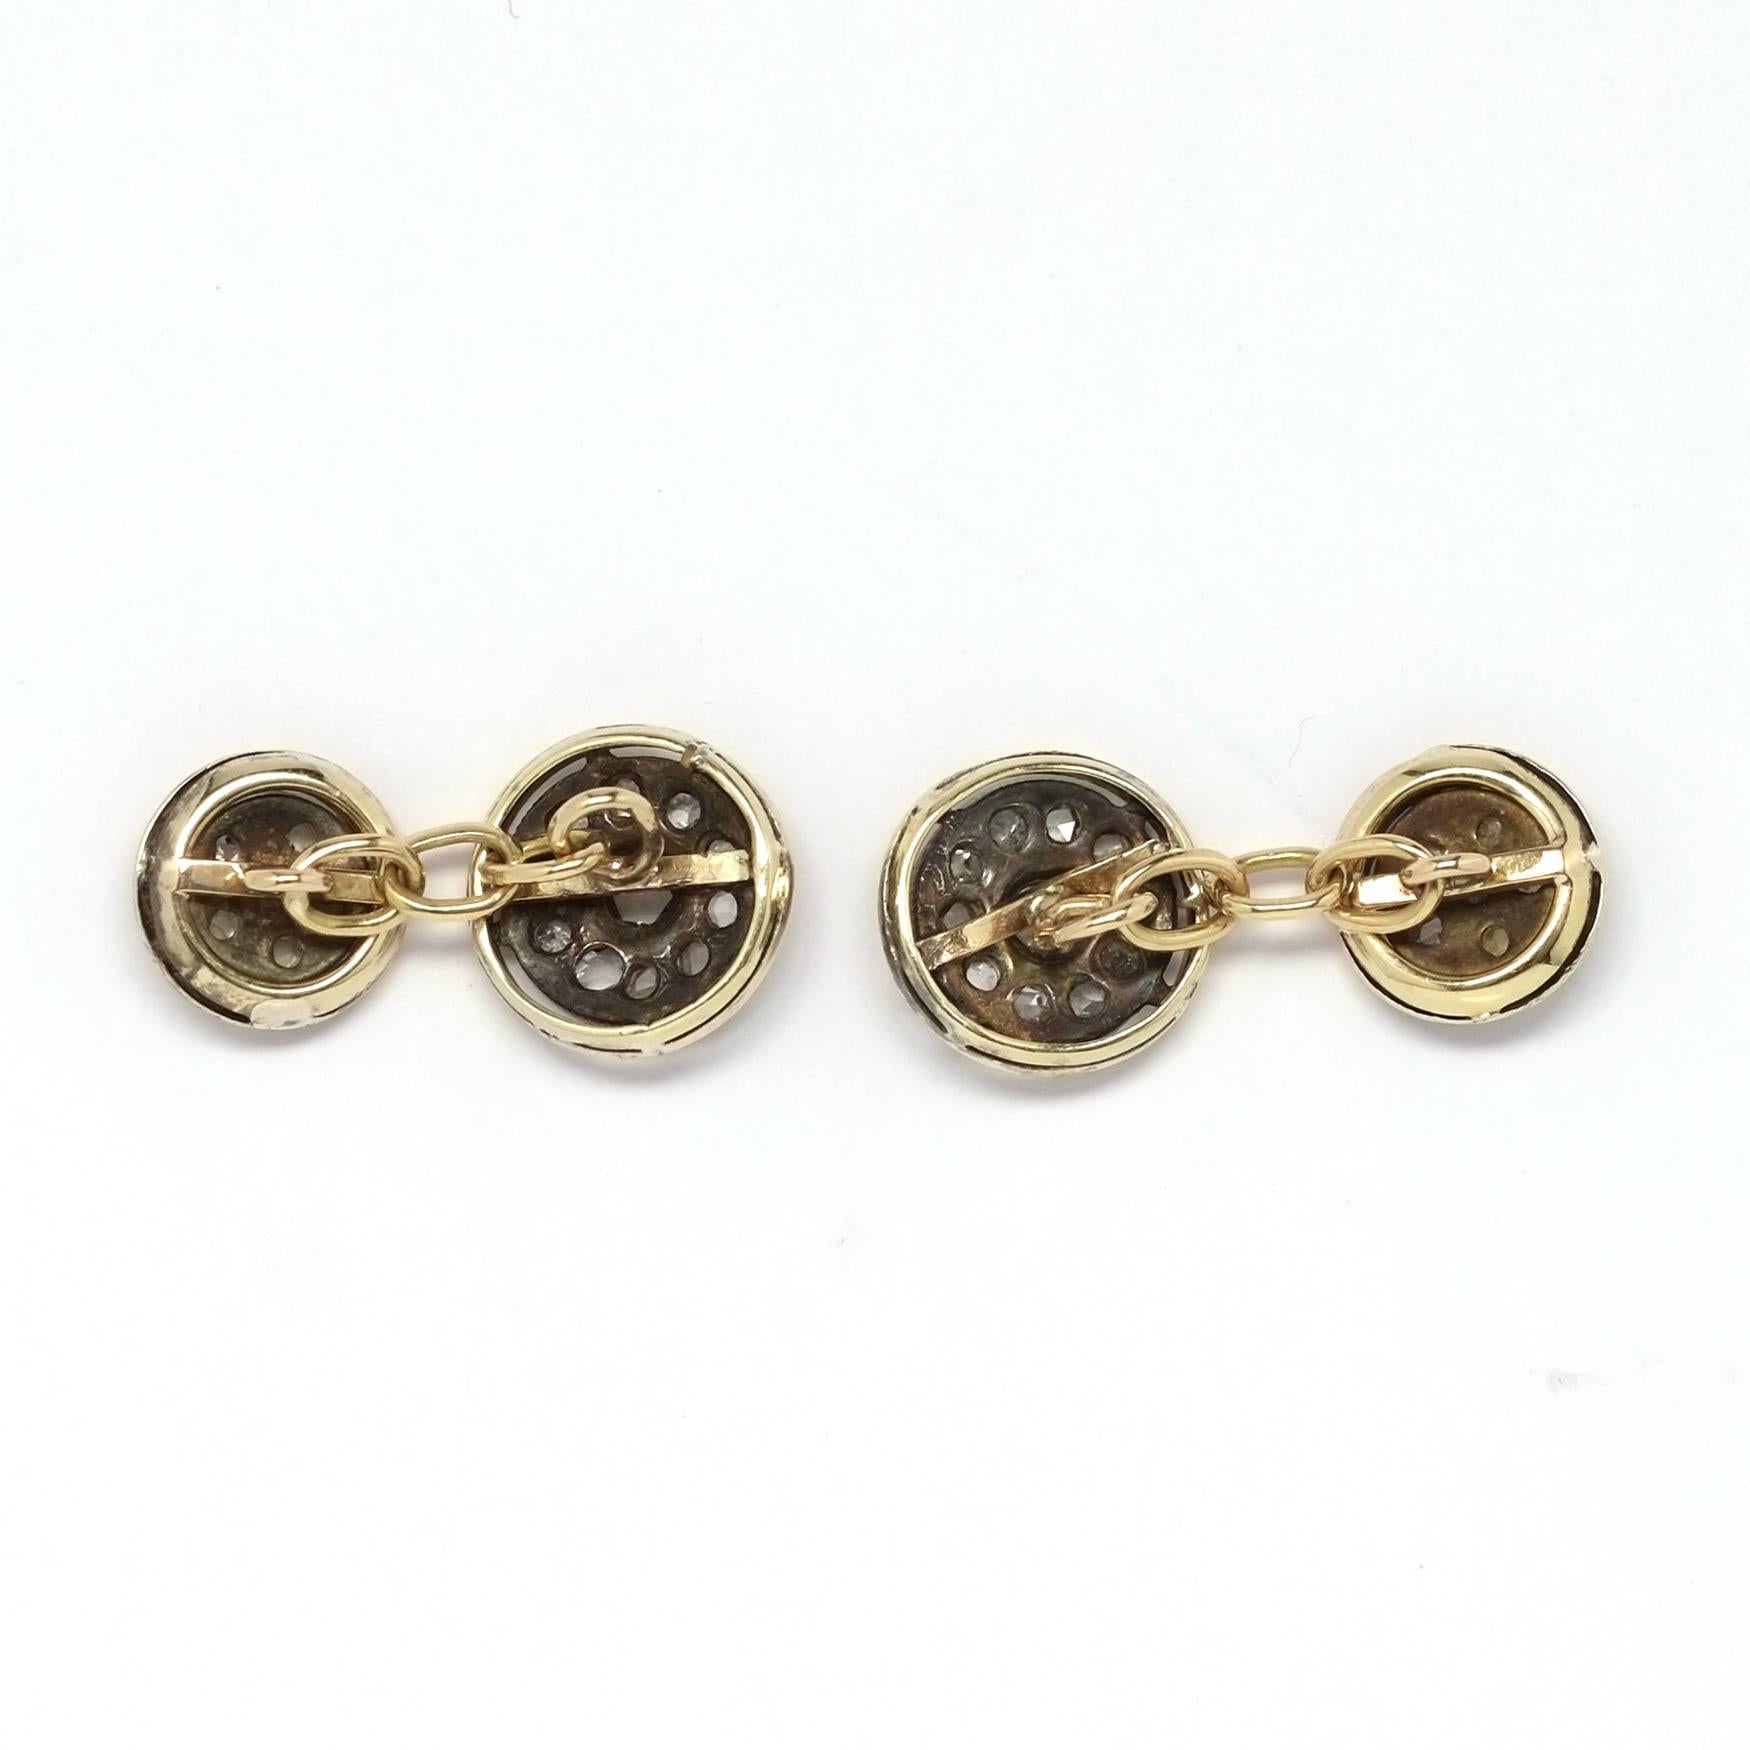 Gold and silver cufflinks with rose-cut diamonds from the early 20th century. The thecniques and materials used testify to the Italian nature of these jewels, today storytellers of the beauty of antiquity and craftsmanship. The beginning of the new